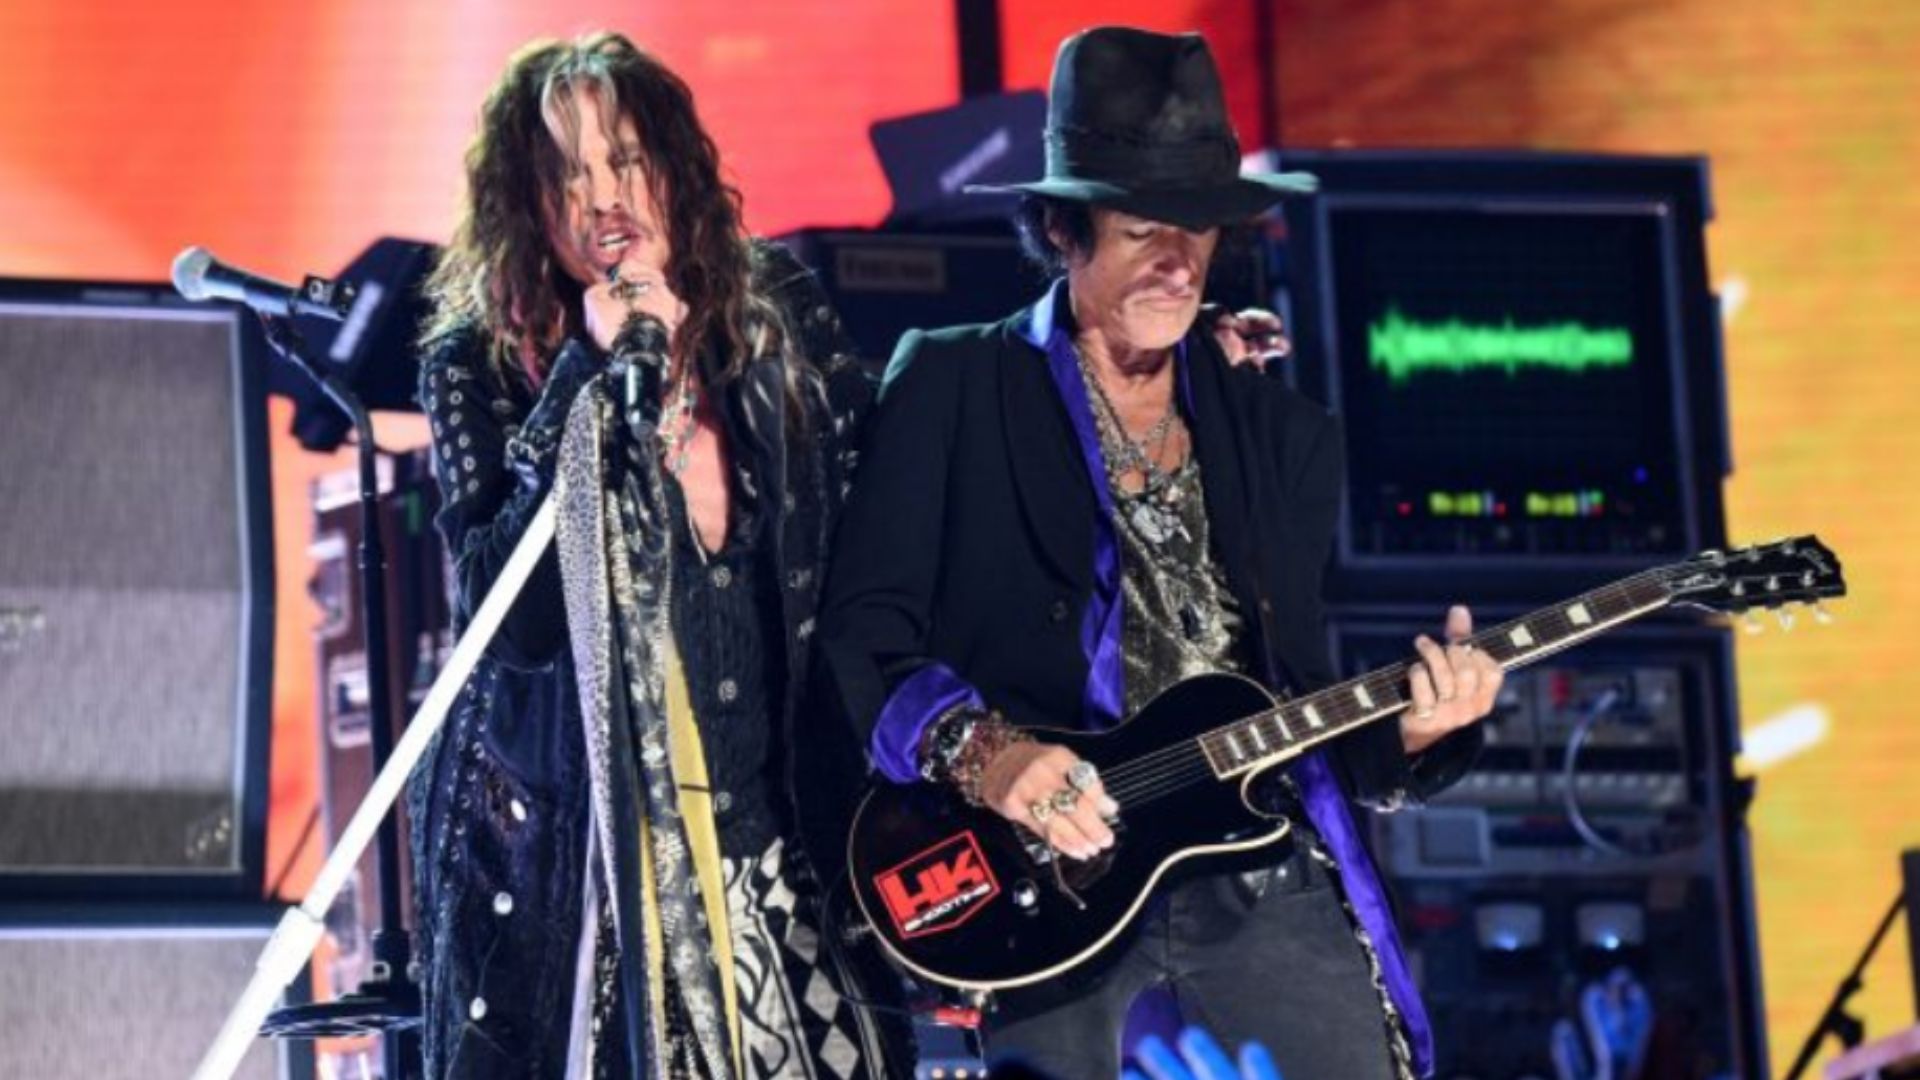 Watch Aerosmith play out their most memorable show before pandemic